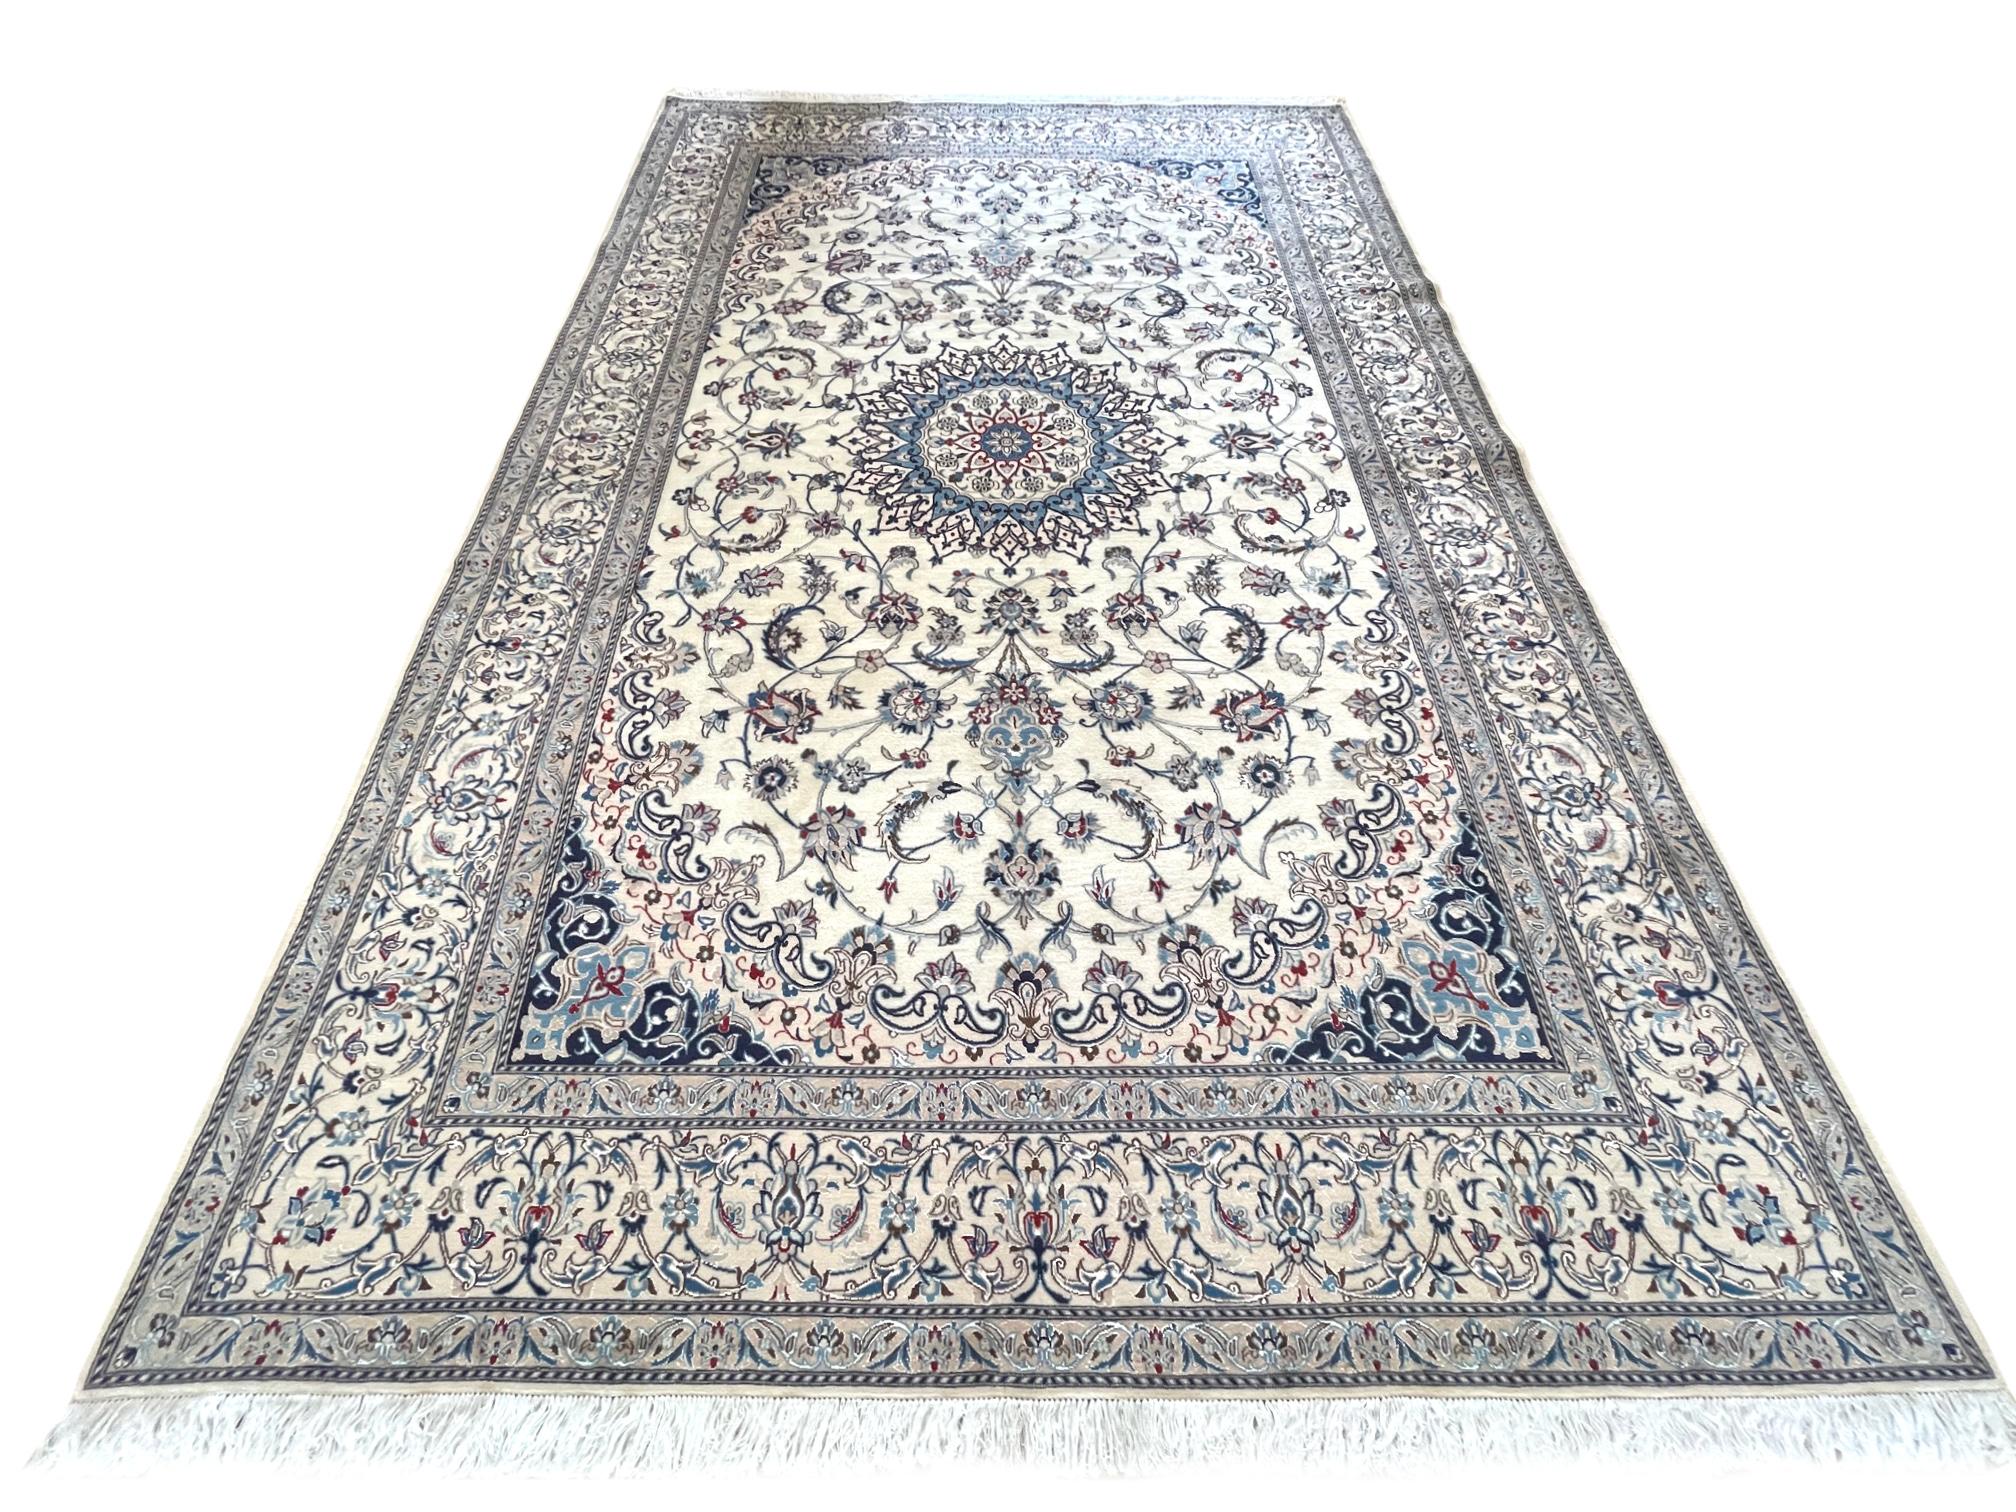 This authentic Persian round hand-made Nain 9 LAA has high quality wool and silk pile with cotton foundation. (Each thread of the warp is made up of three threads, which you have 3x3=9 making it a 9 LAA Nain, equivalent to about 250 knots per square